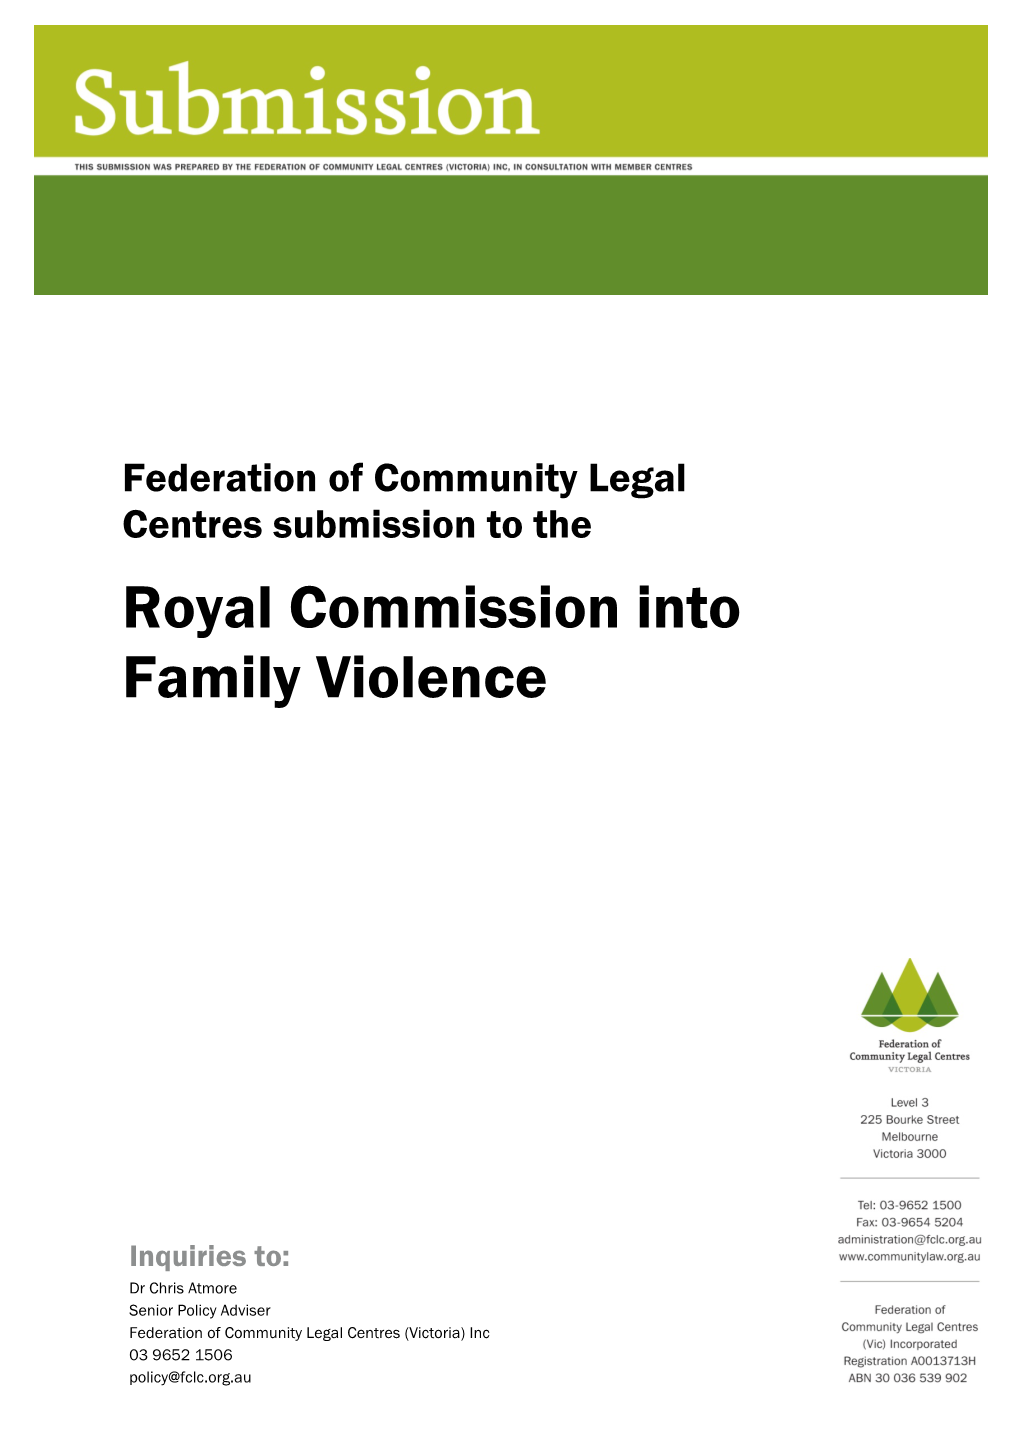 Submission to the Royal Commission Into Family Violence